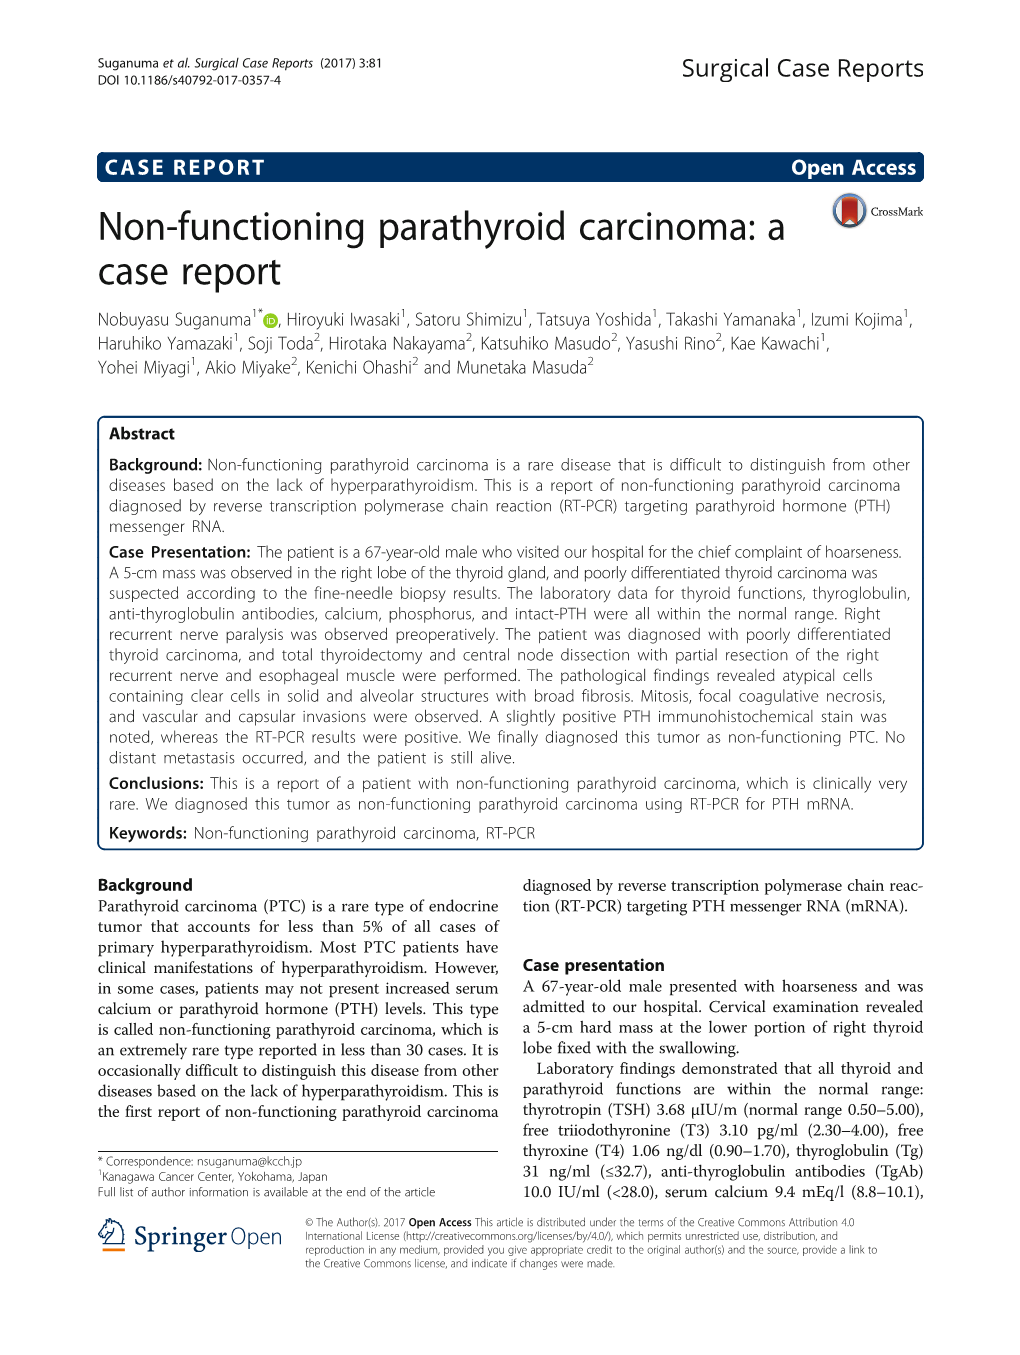 Non-Functioning Parathyroid Carcinoma: a Case Report